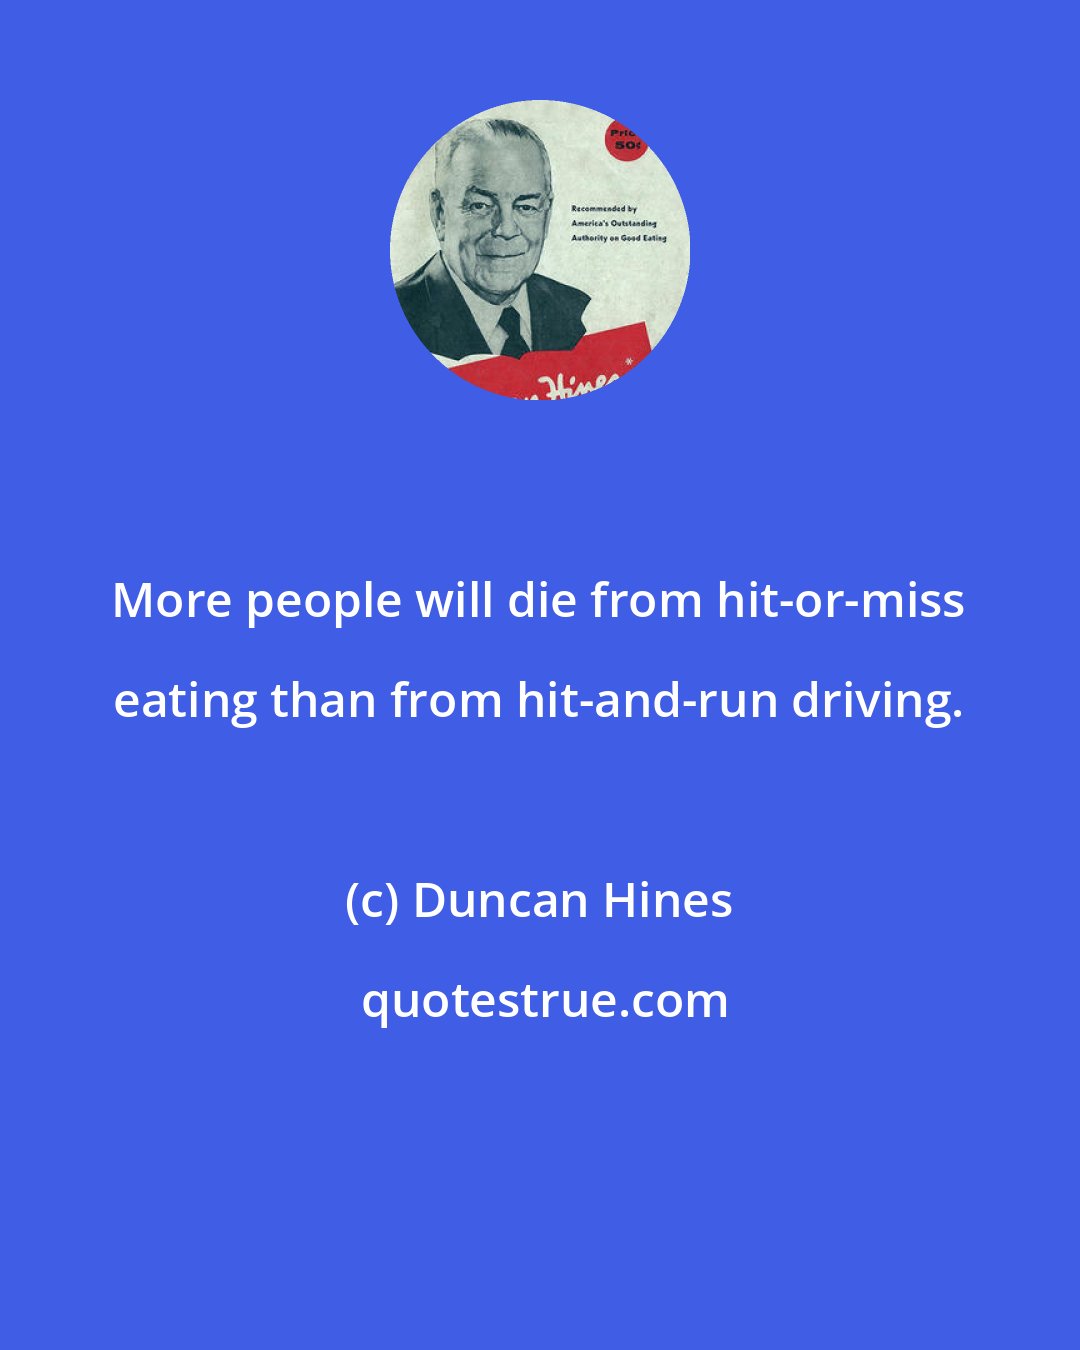 Duncan Hines: More people will die from hit-or-miss eating than from hit-and-run driving.